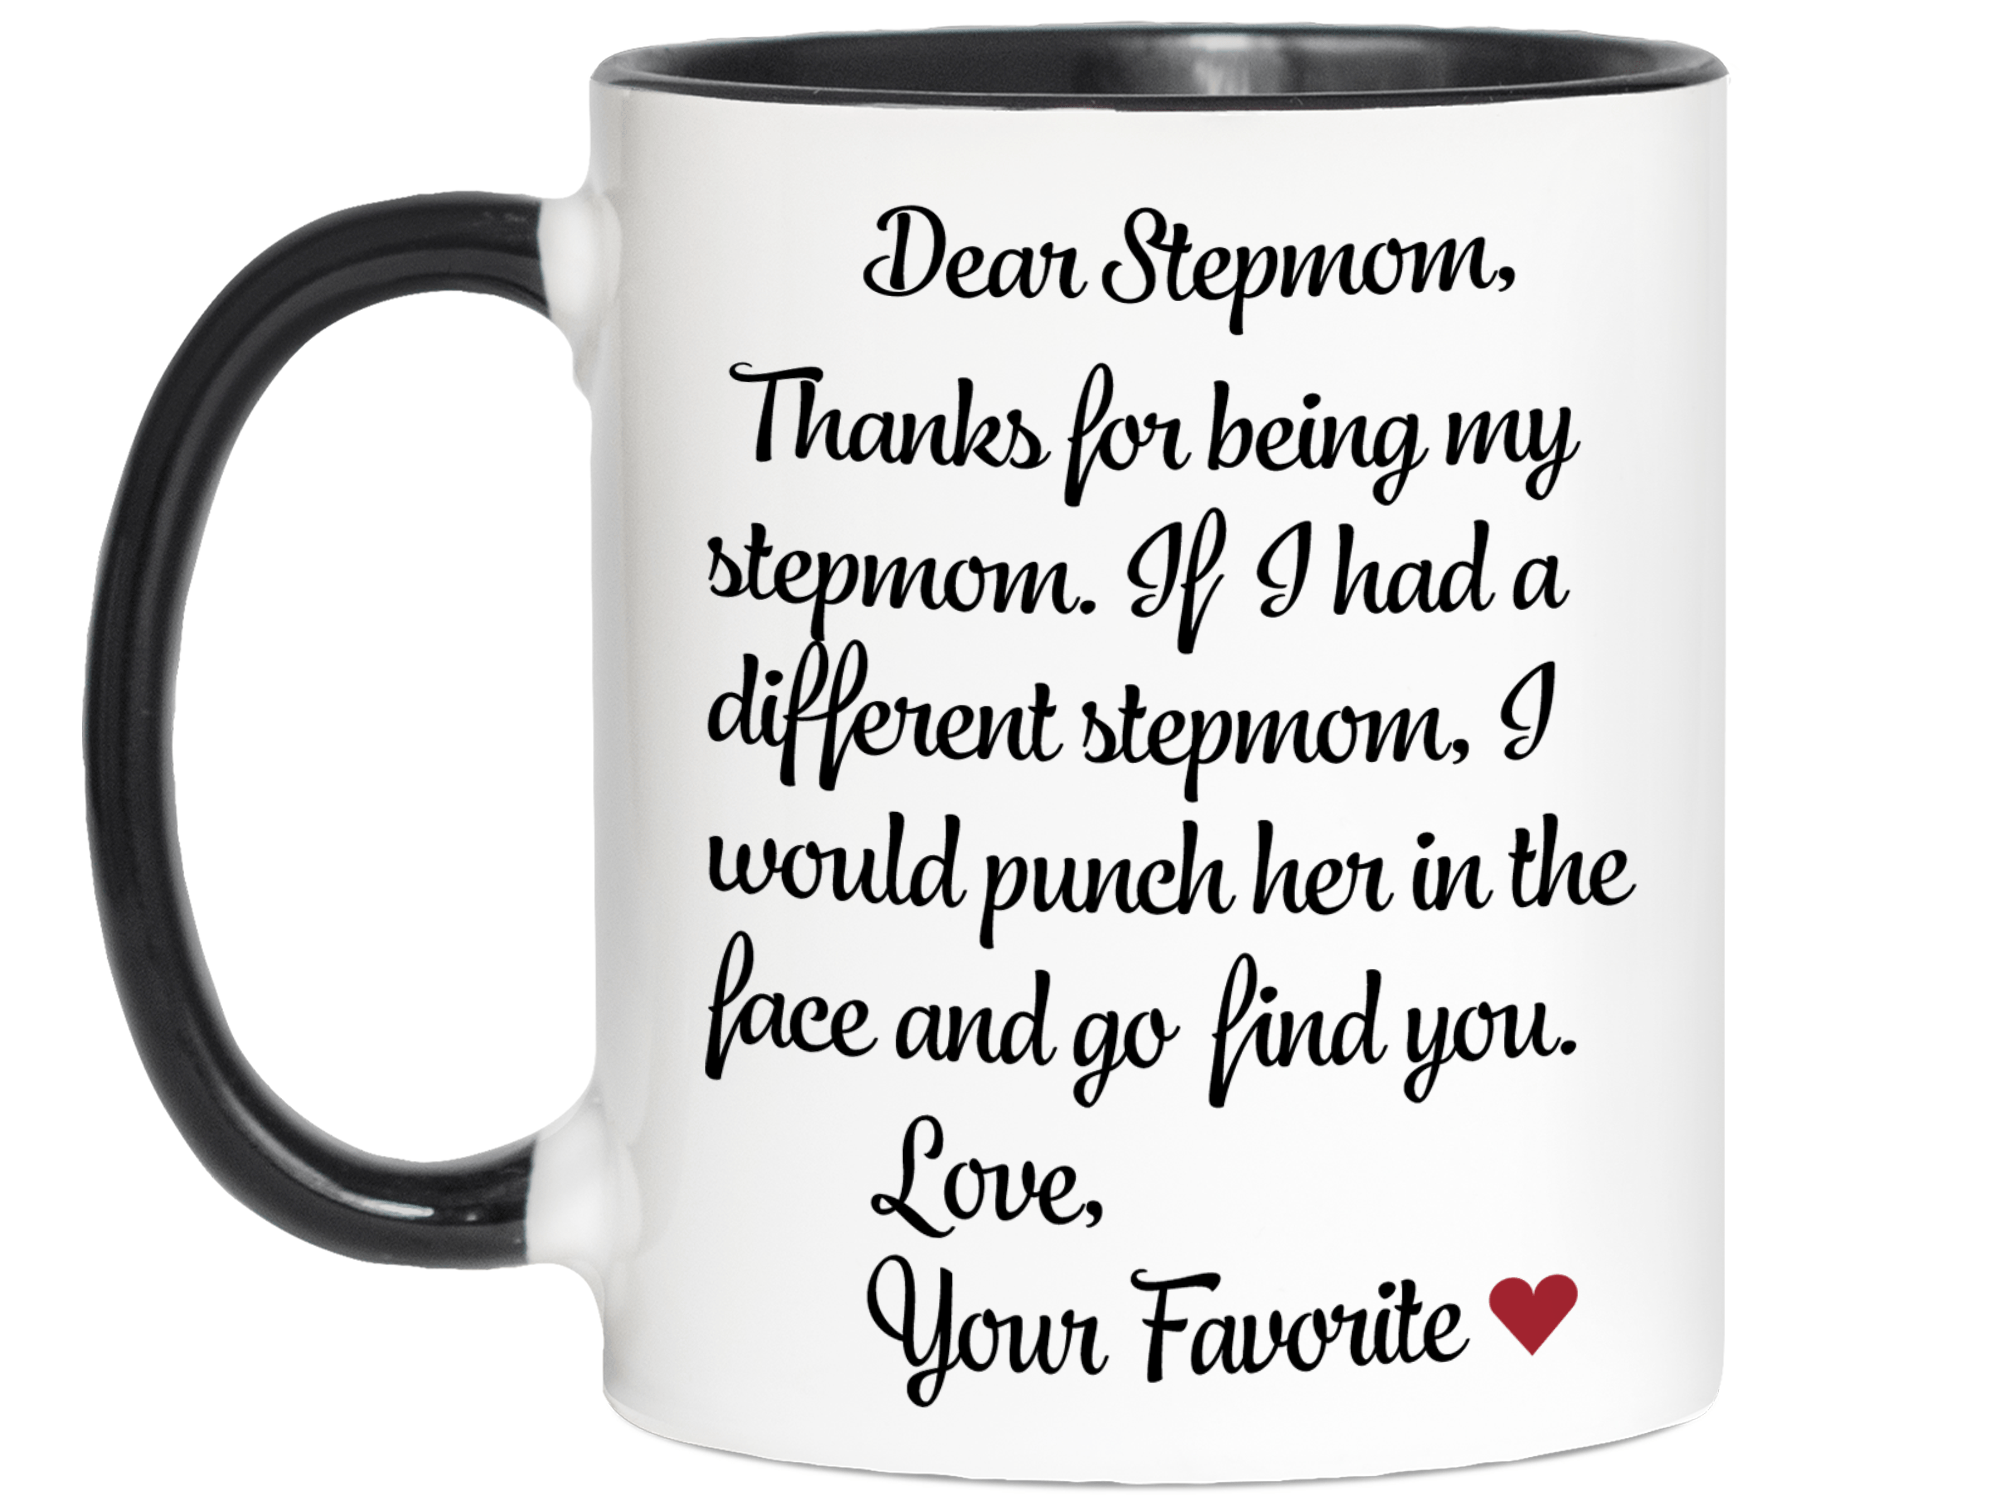 Funny Gifts for Moms - Thanks for Being My Mom Gag Coffee Mug